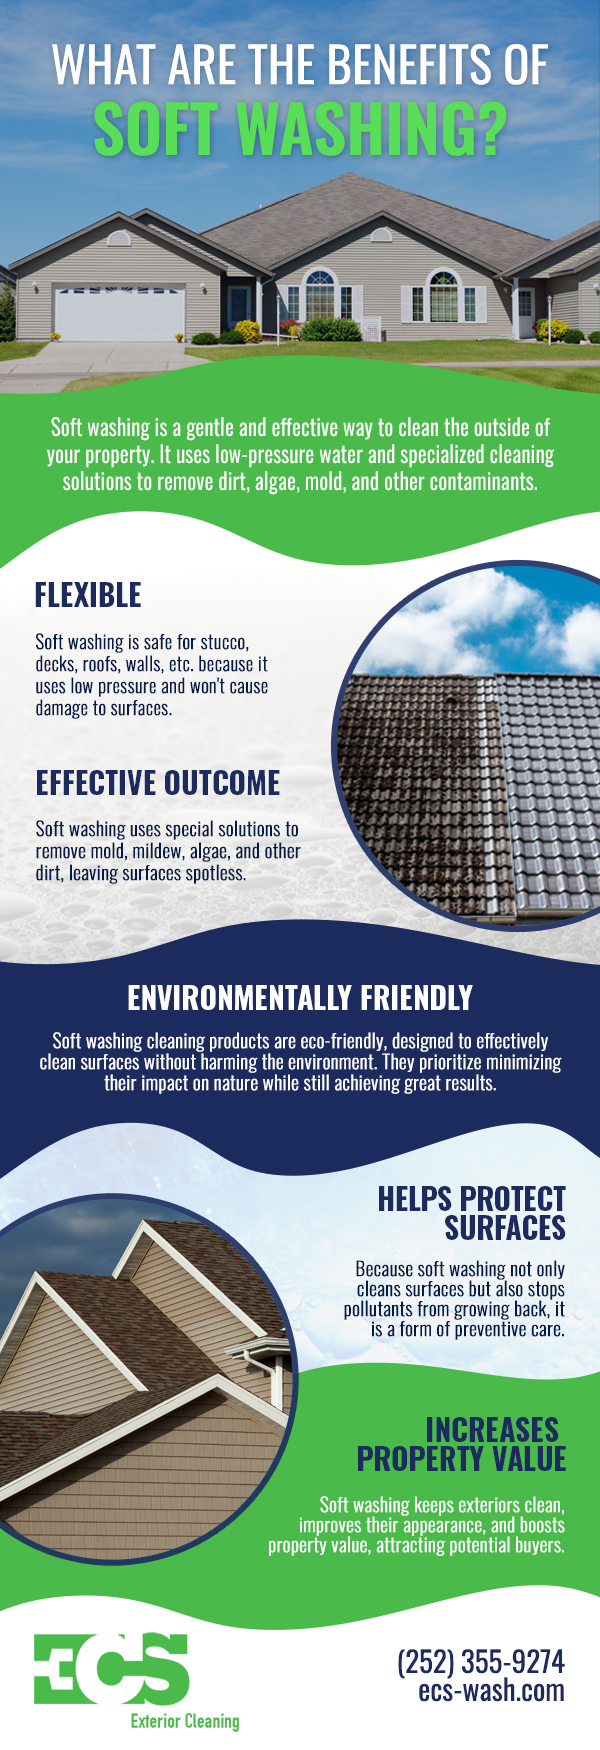 Soft washing offers many benefits for your home.